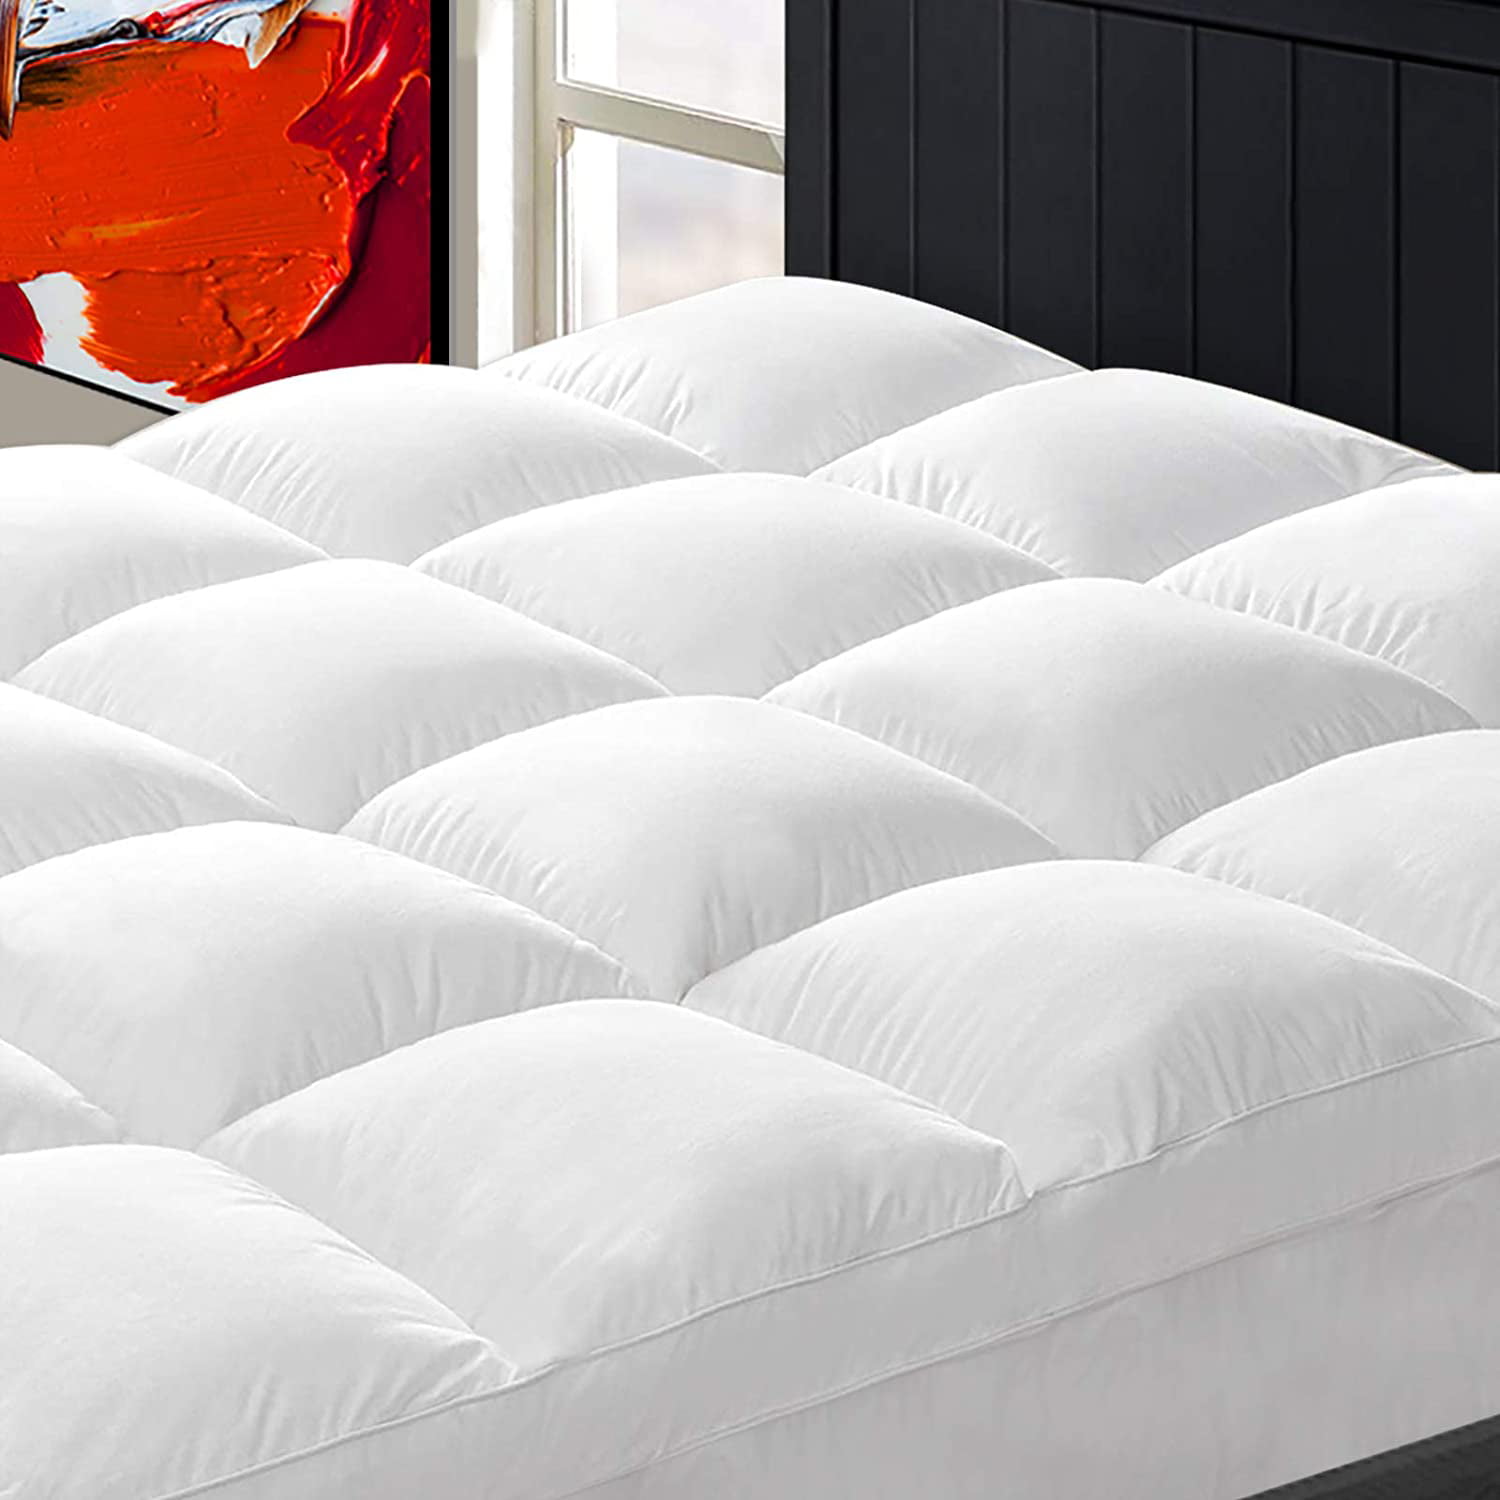 Details about   Cooling Pillow Top Mattress Pad Cover Fitted Deep Pocket Down Alternative Topper 